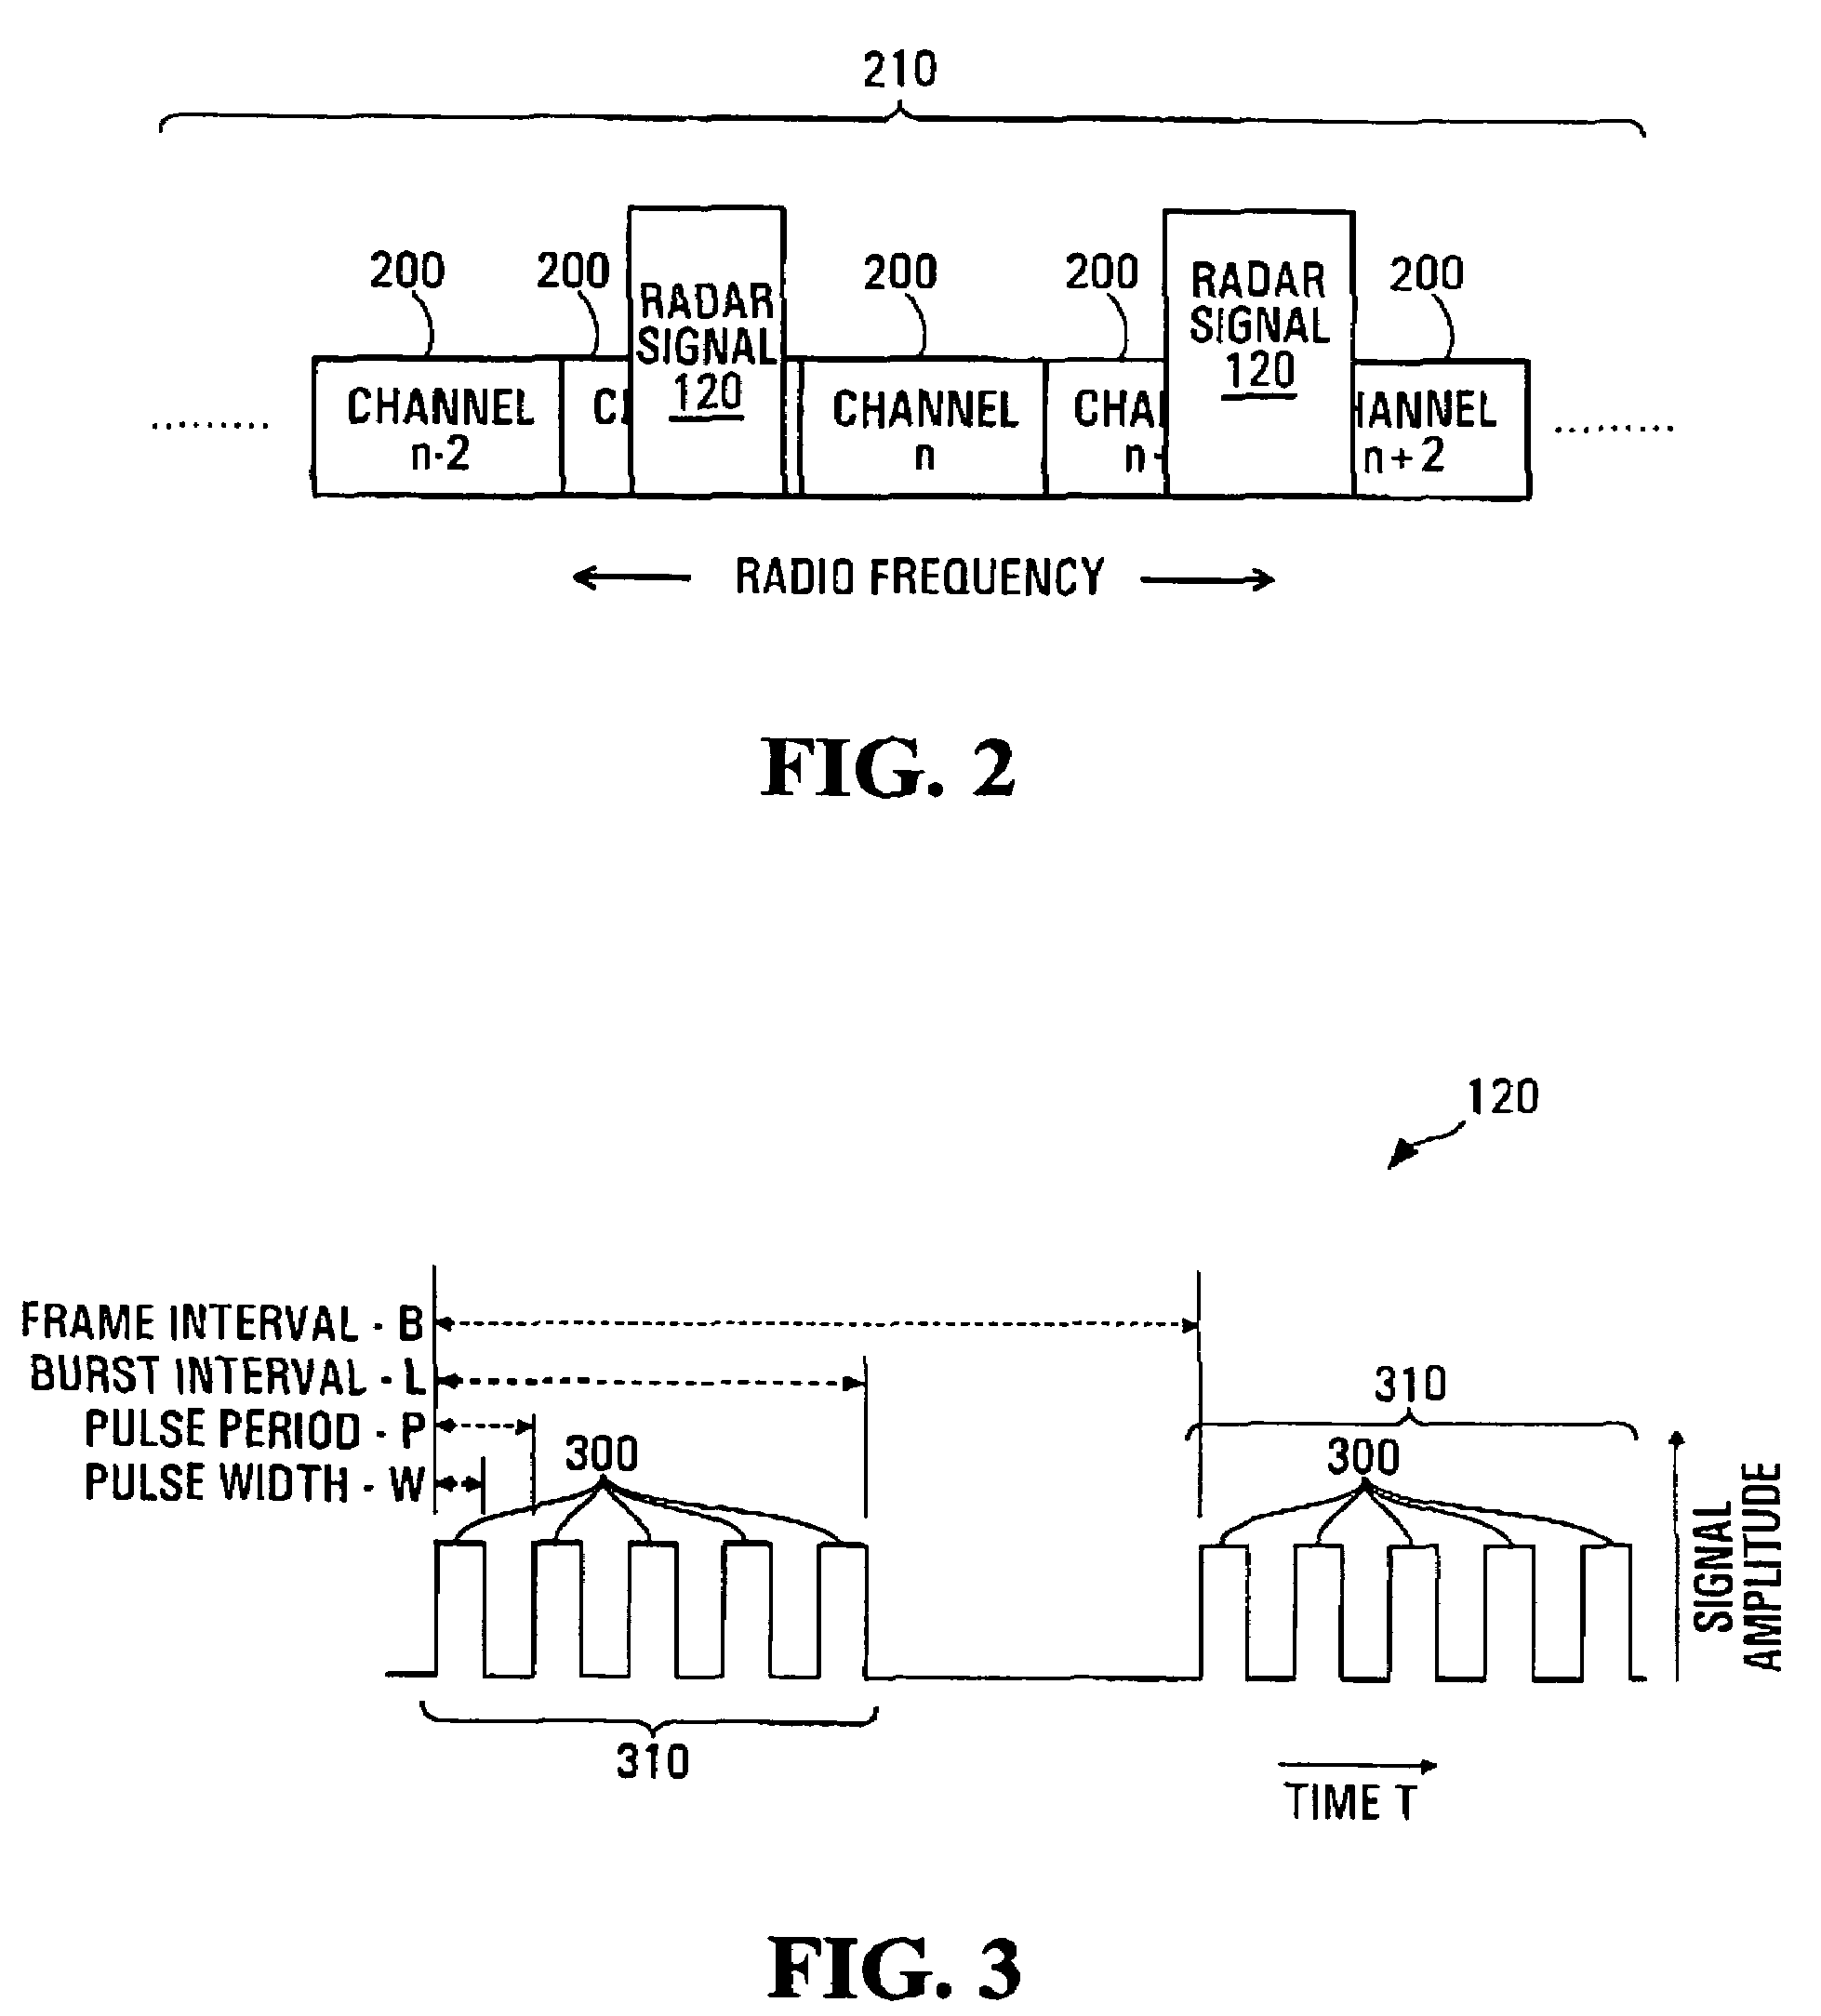 System, method and apparatus for reliable detection of extra system signals for a multi-node RLAN system